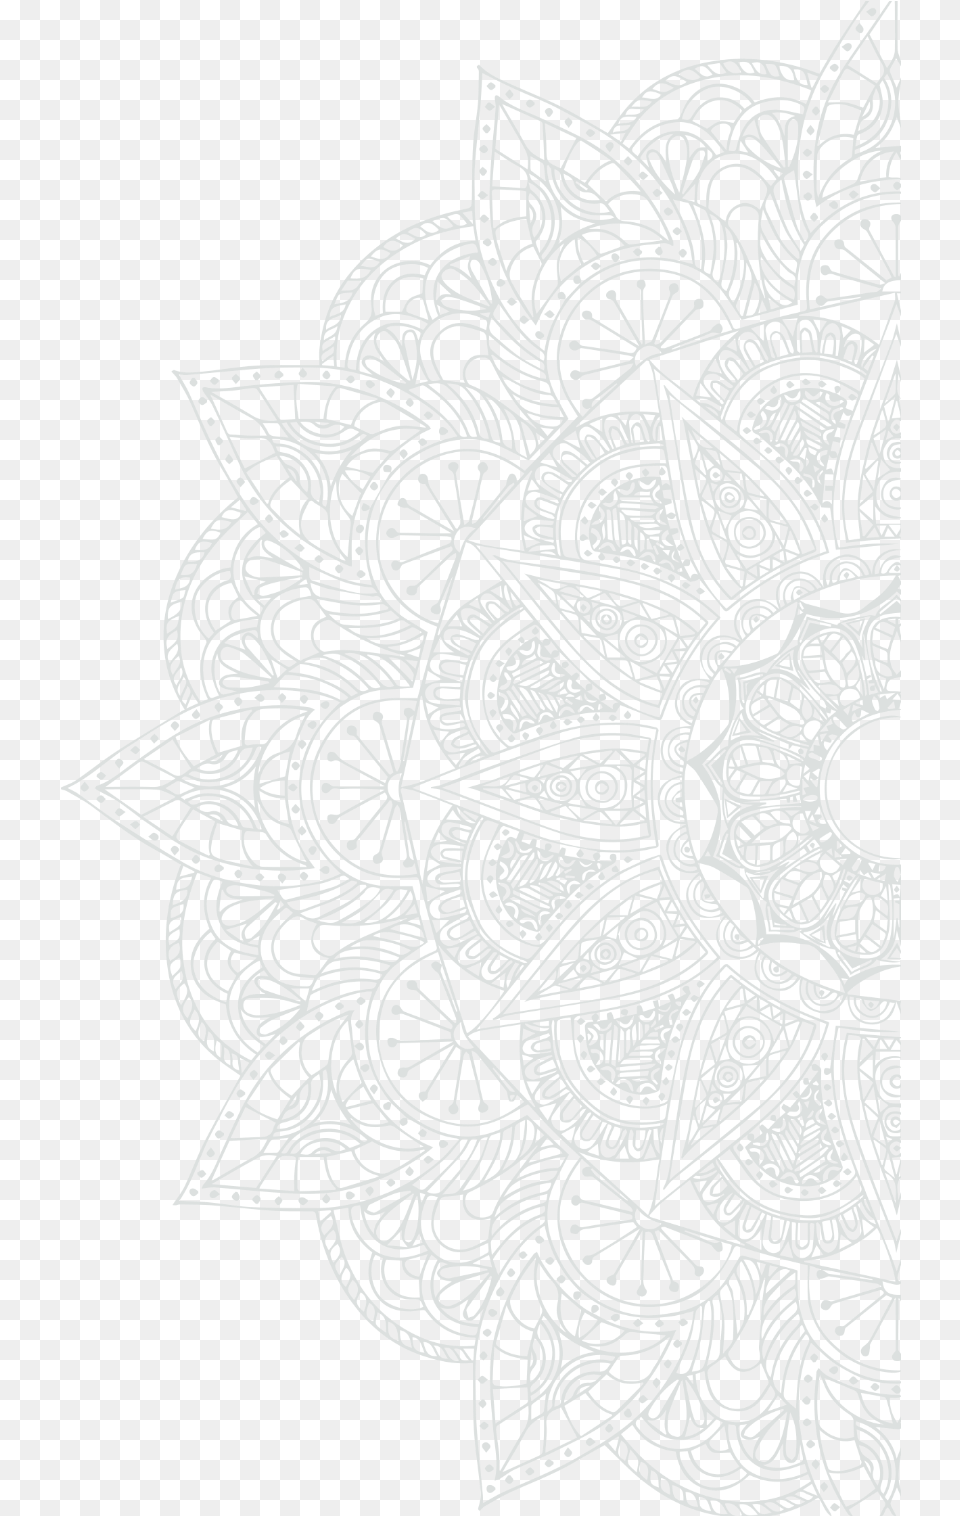 Mandala Dream Holistic Islam Sufism Transformation And The Needs, Lace, Pattern Png Image